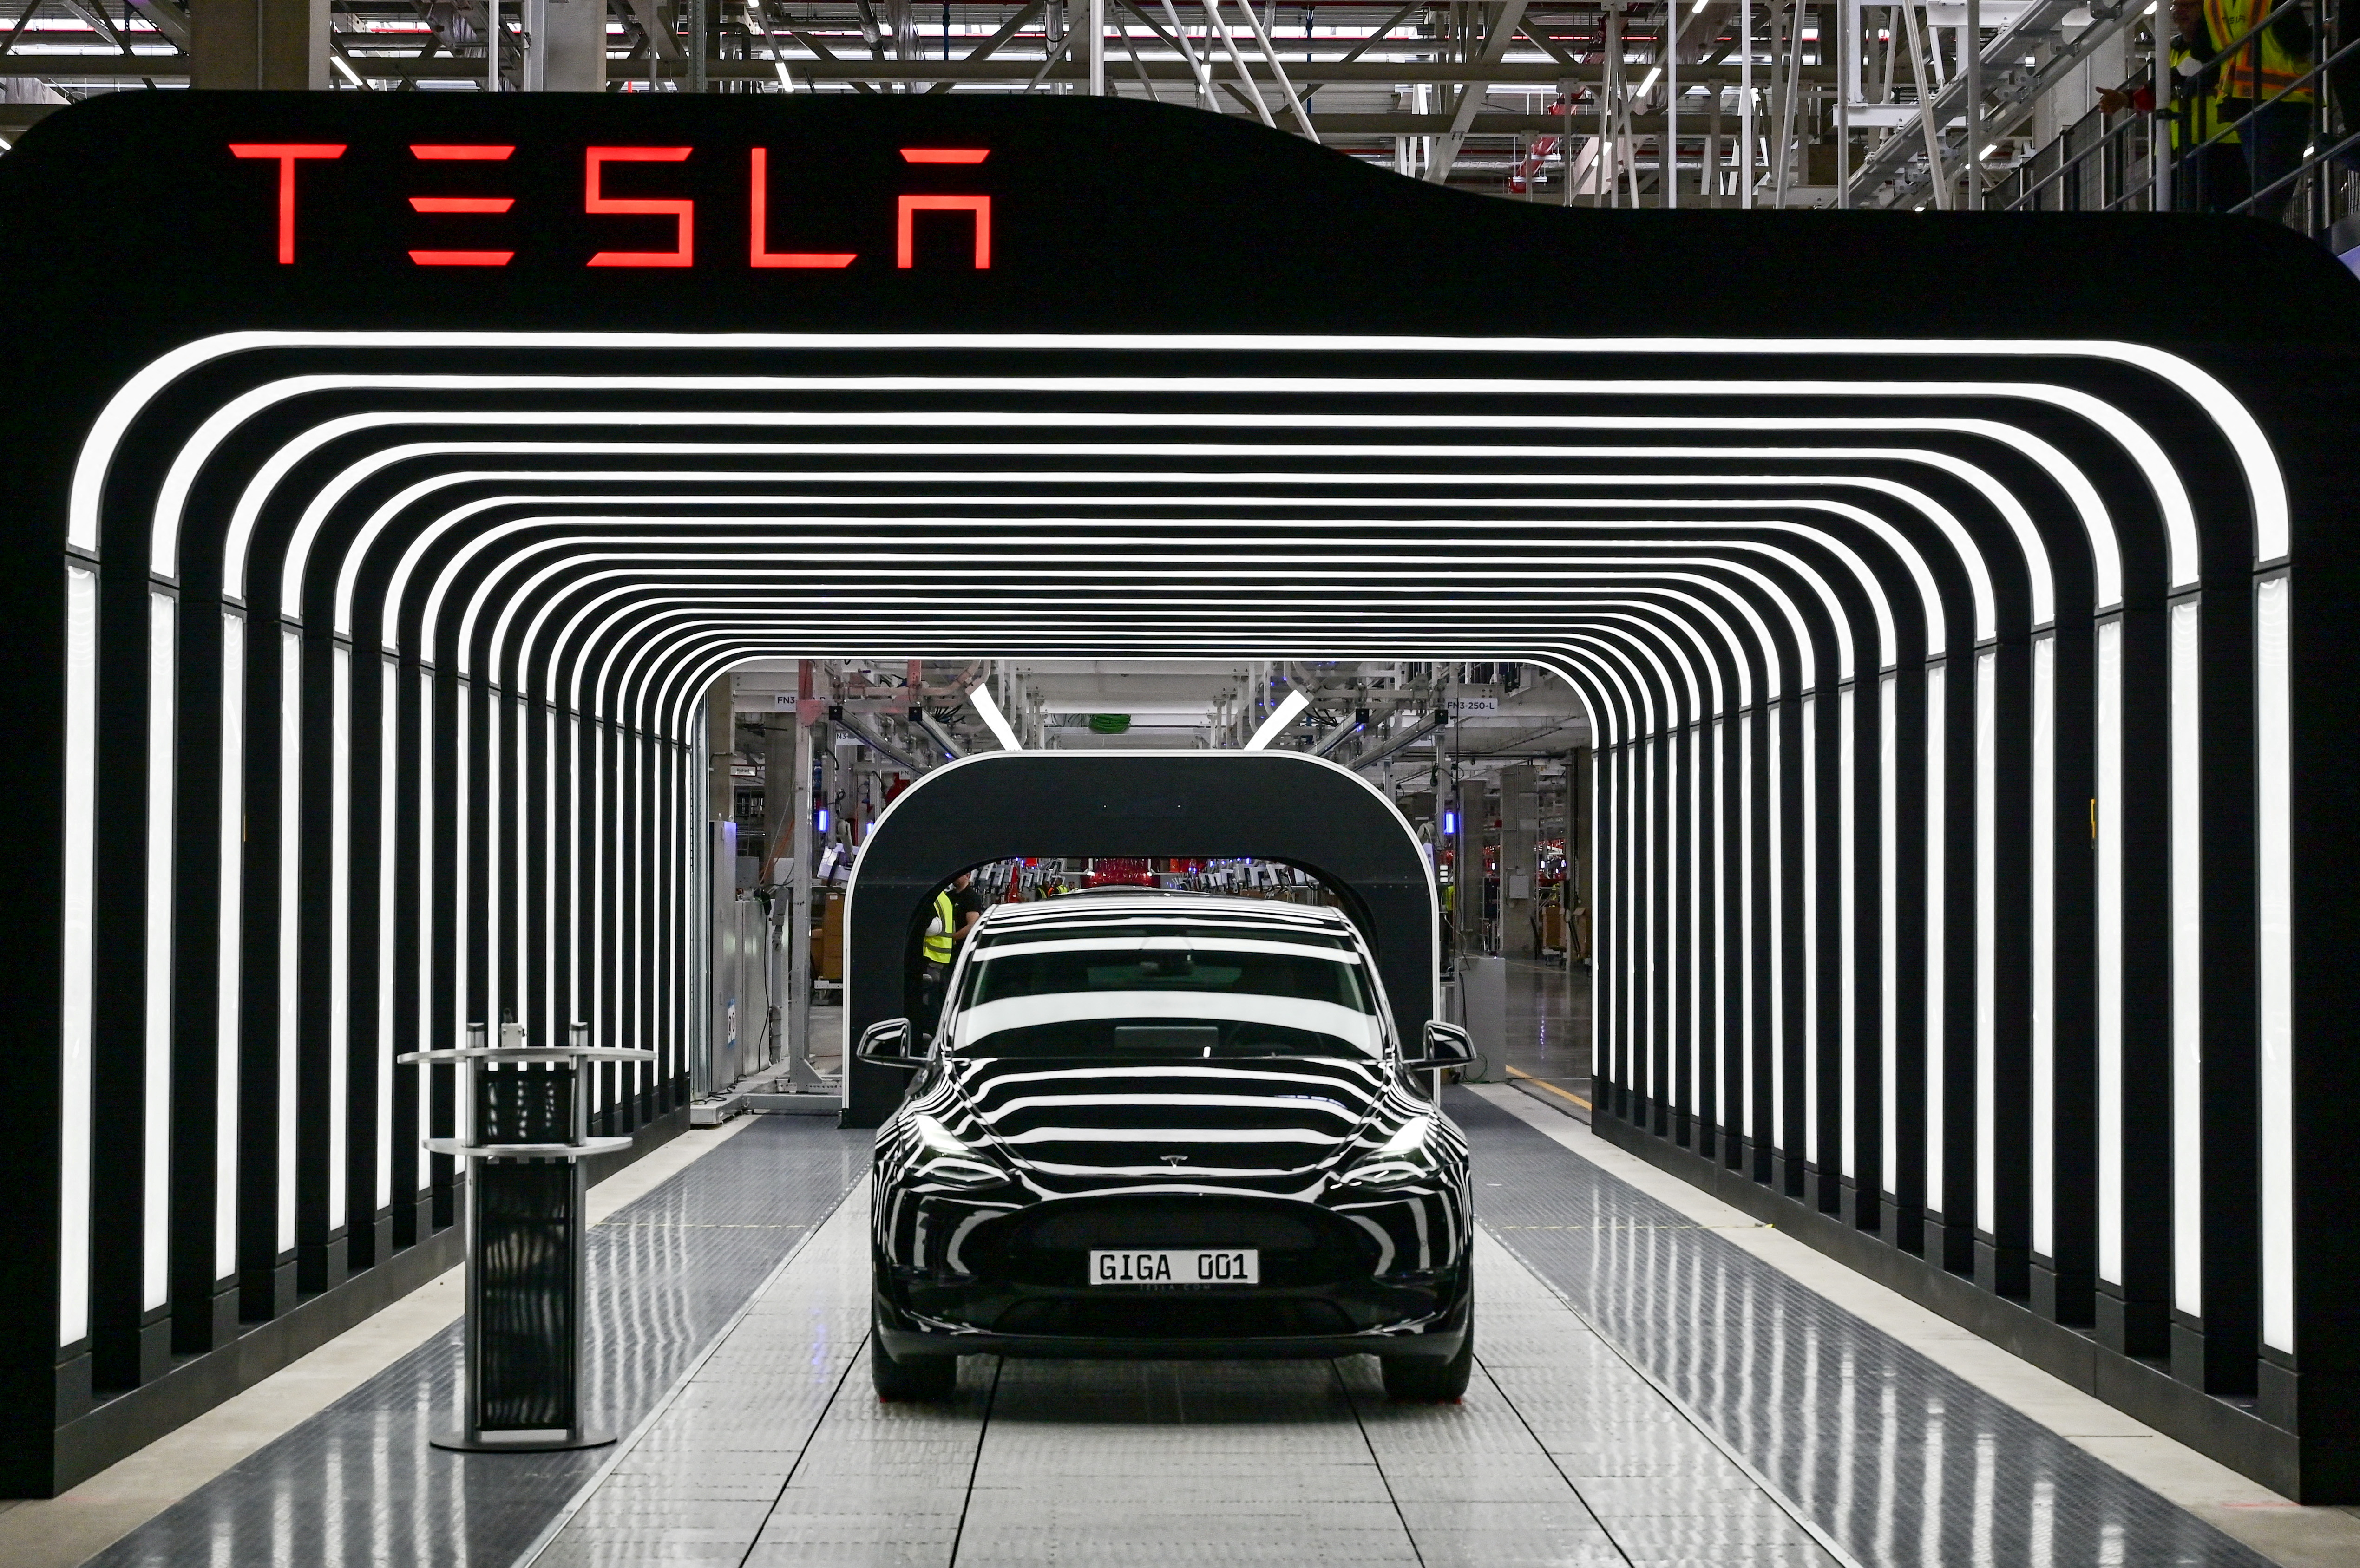 Tesla hands over the first cars produced at the new factory in Gruenheide